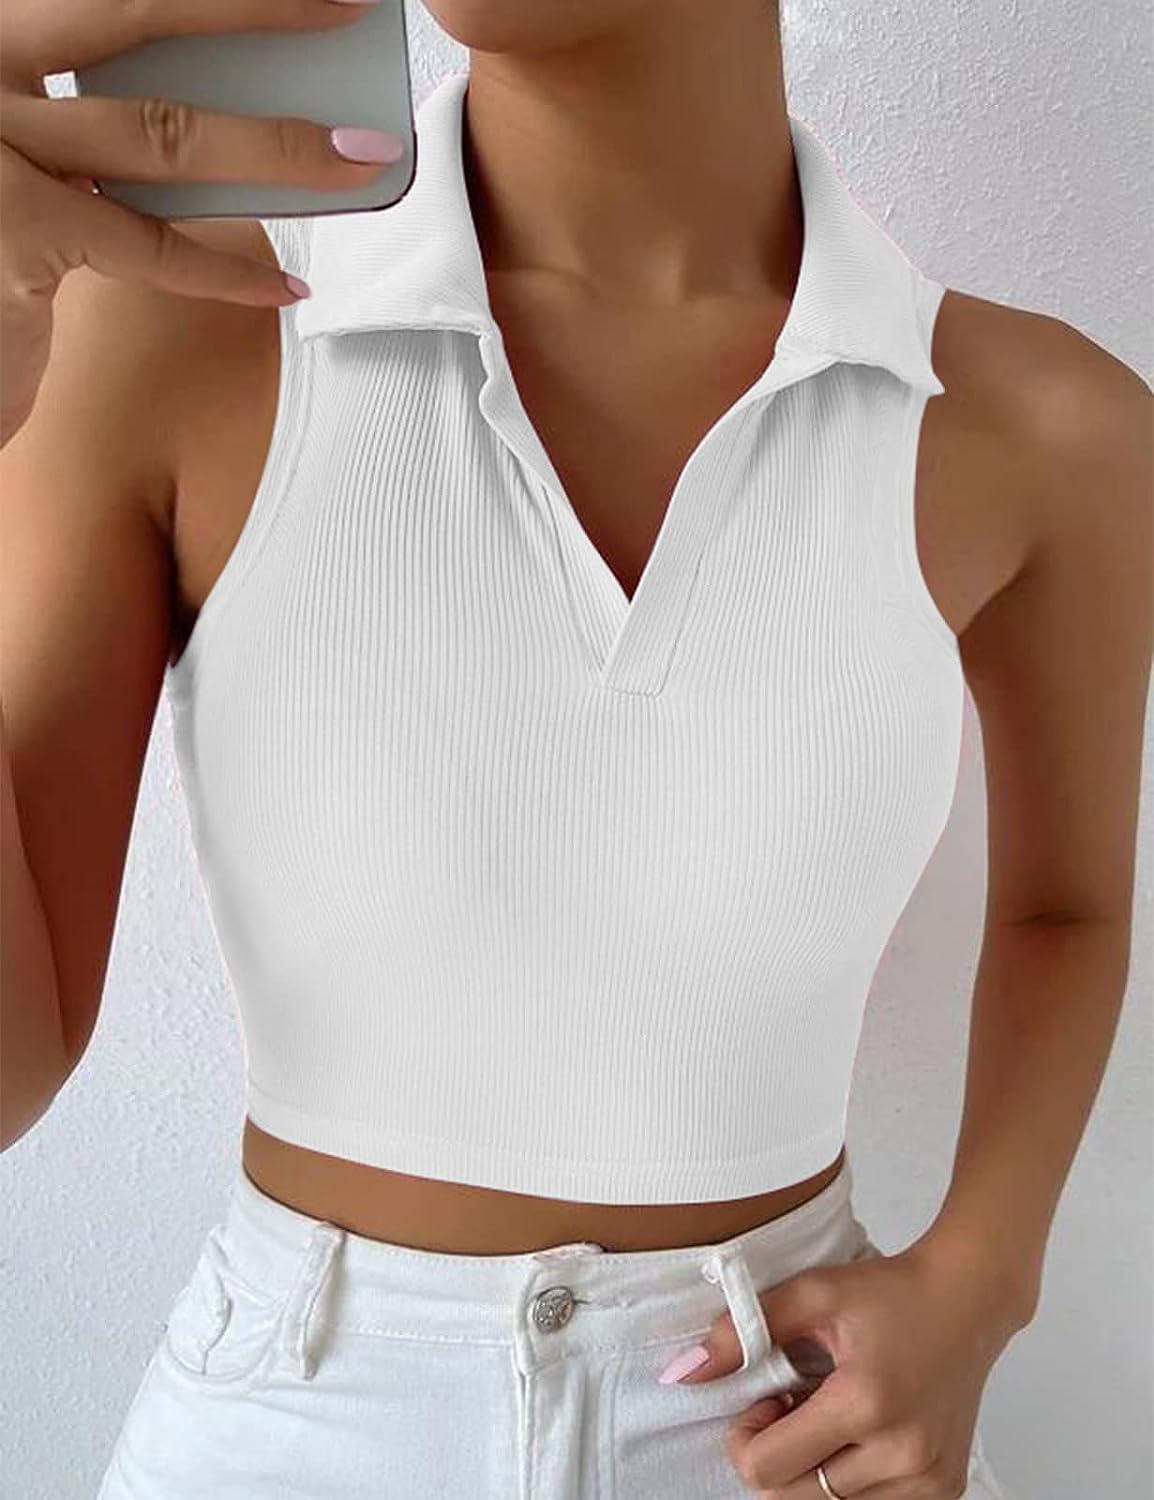 Get ubras Ribbed Cropped Racerback Tank Top Built-In Bra Top-white-S 1 each  Delivered